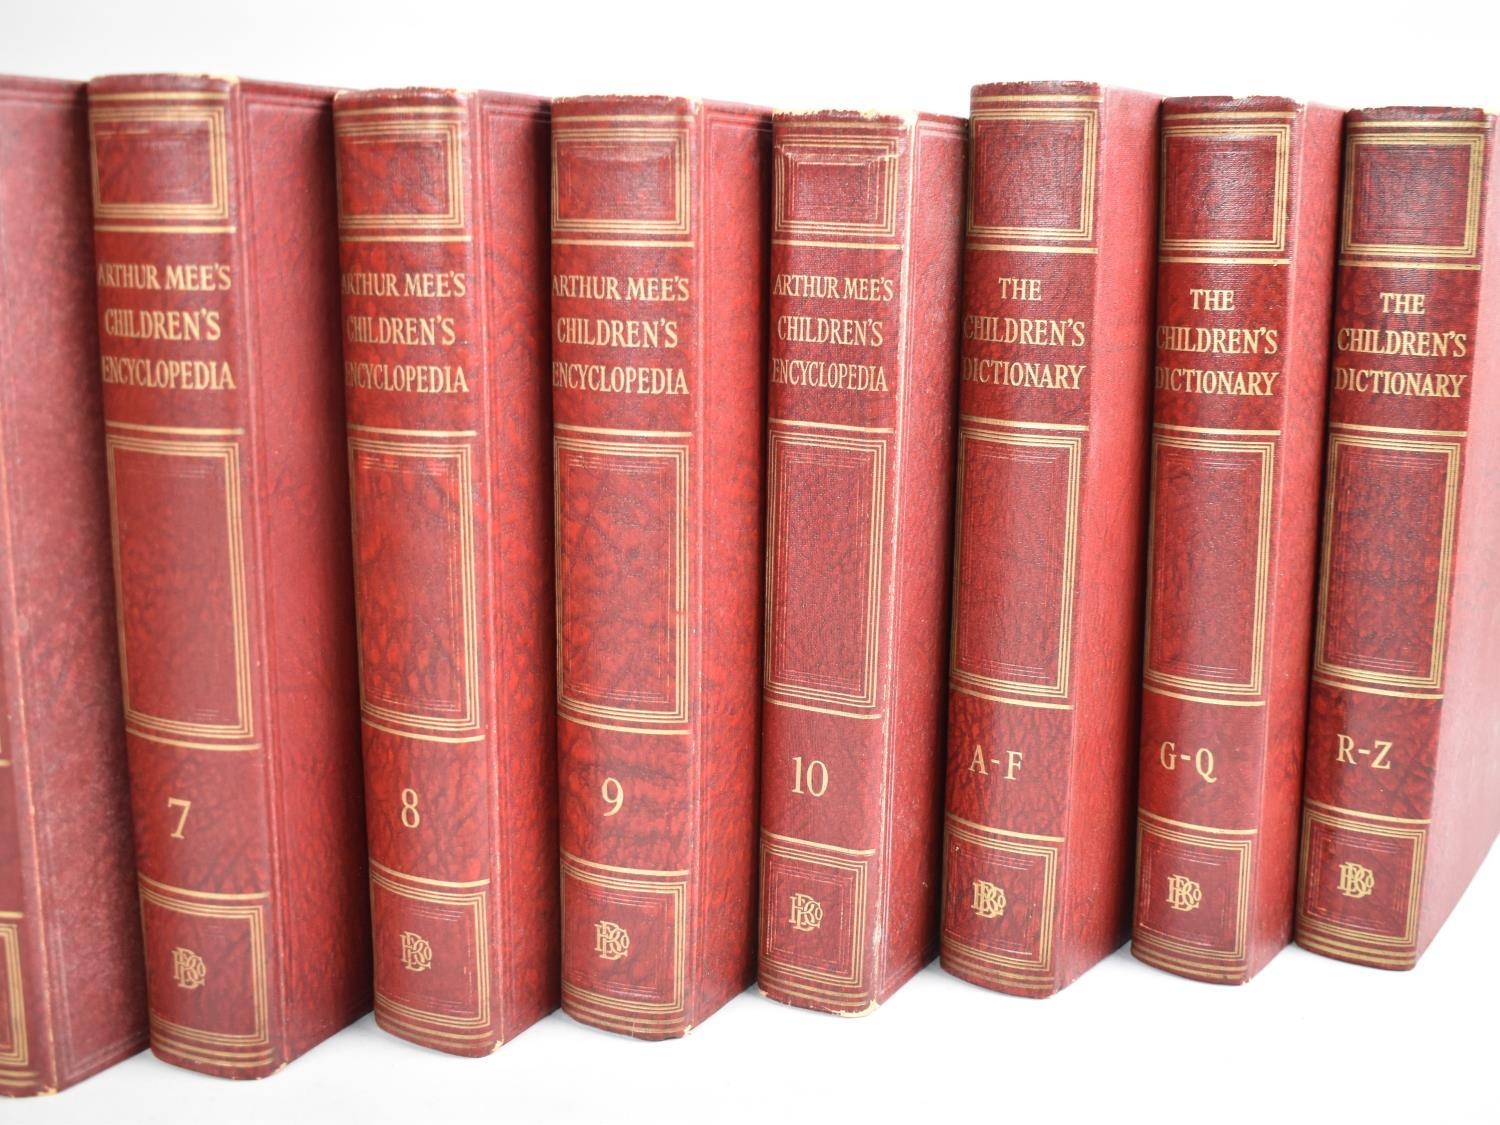 A Set of 10 Volumes Arthur Mee's Children's Encyclopedia together with Three Dictionary Volumes - Image 3 of 4